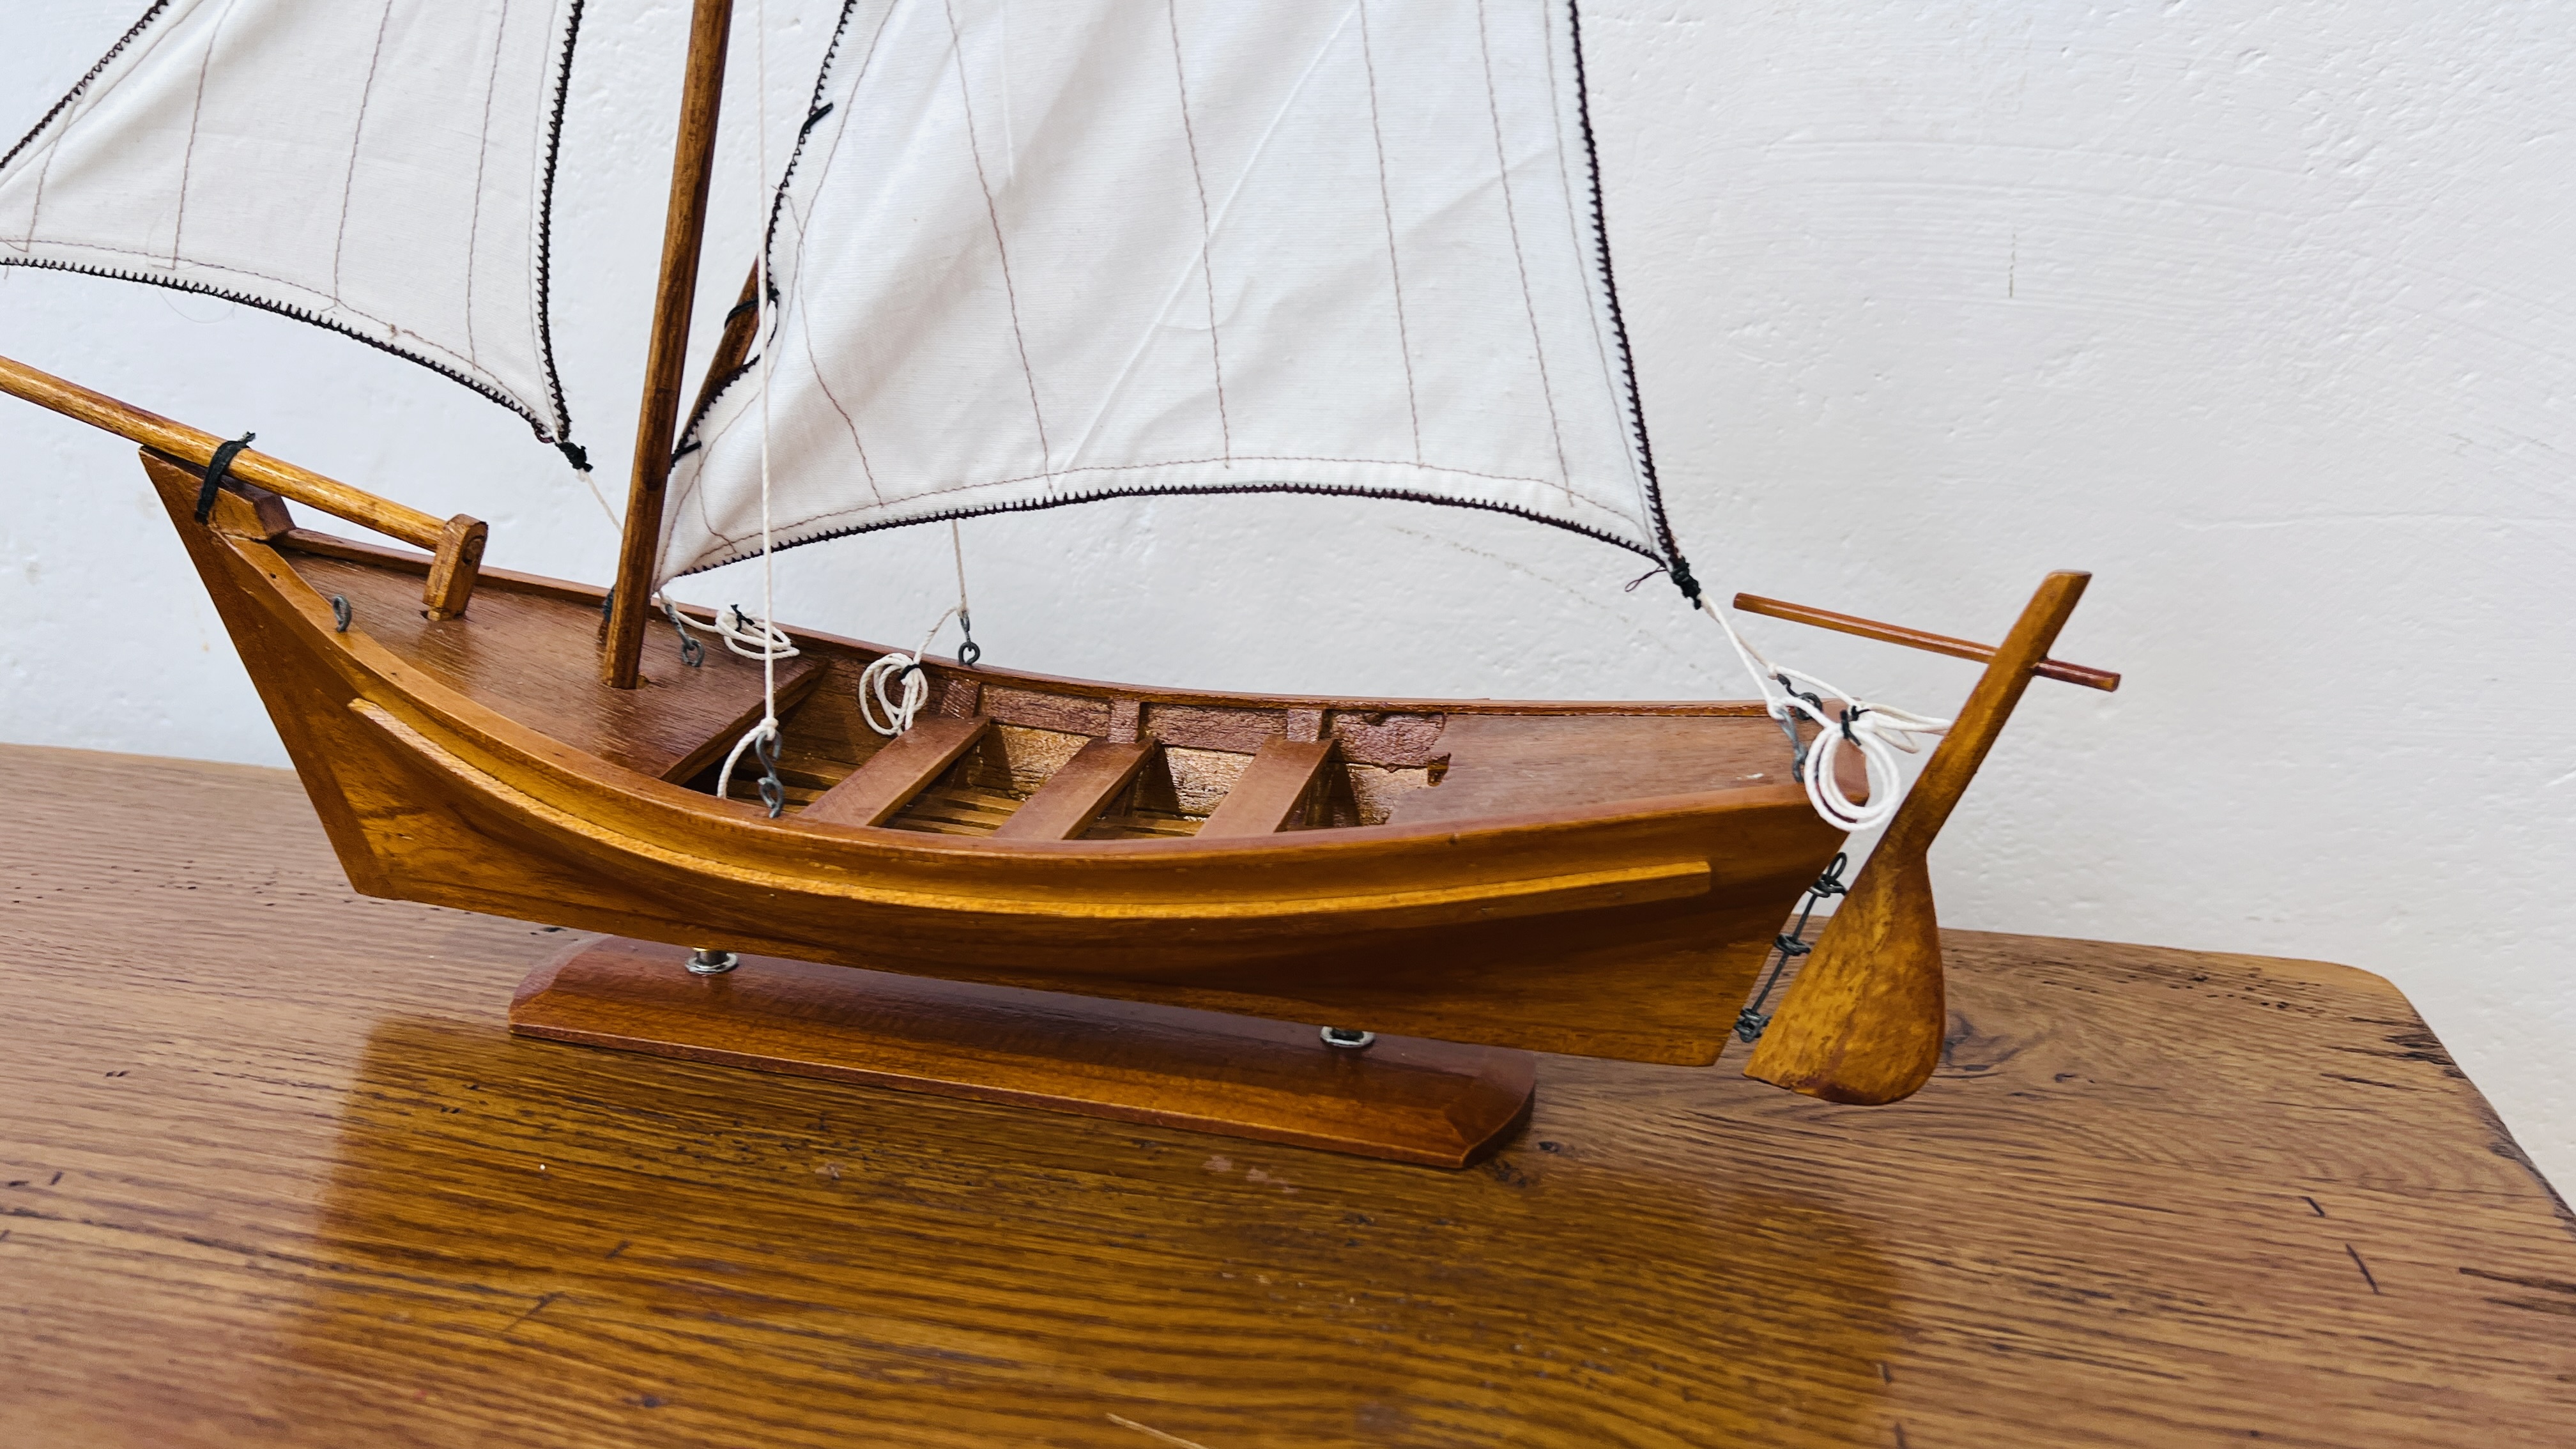 A MODEL WOODEN GALLEON LENGTH 80CM, HEIGHT 60CM AND A WOODEN SAILING BOAT MODEL LENGTH 43CM, - Image 9 of 10